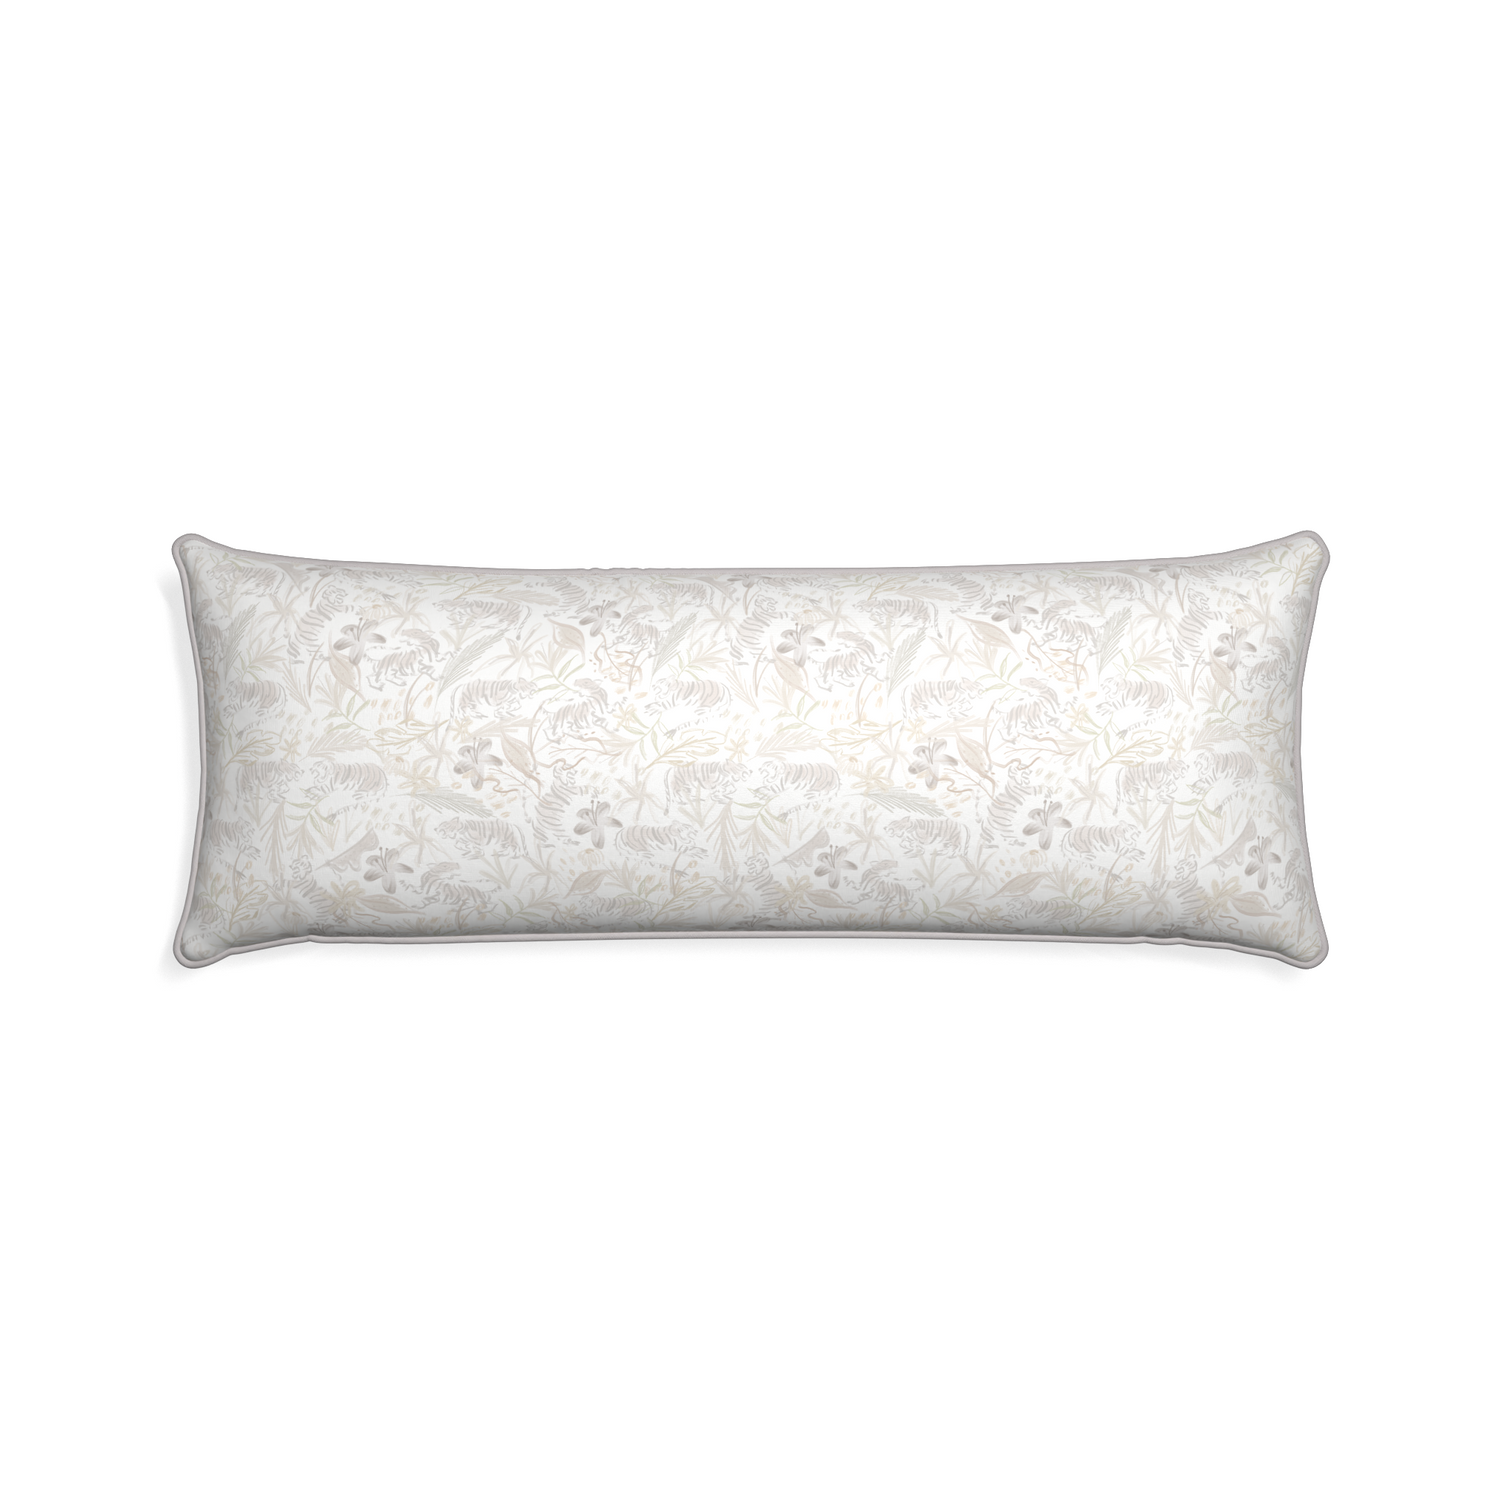 Xl-lumbar frida sand custom beige chinoiserie tigerpillow with pebble piping on white background